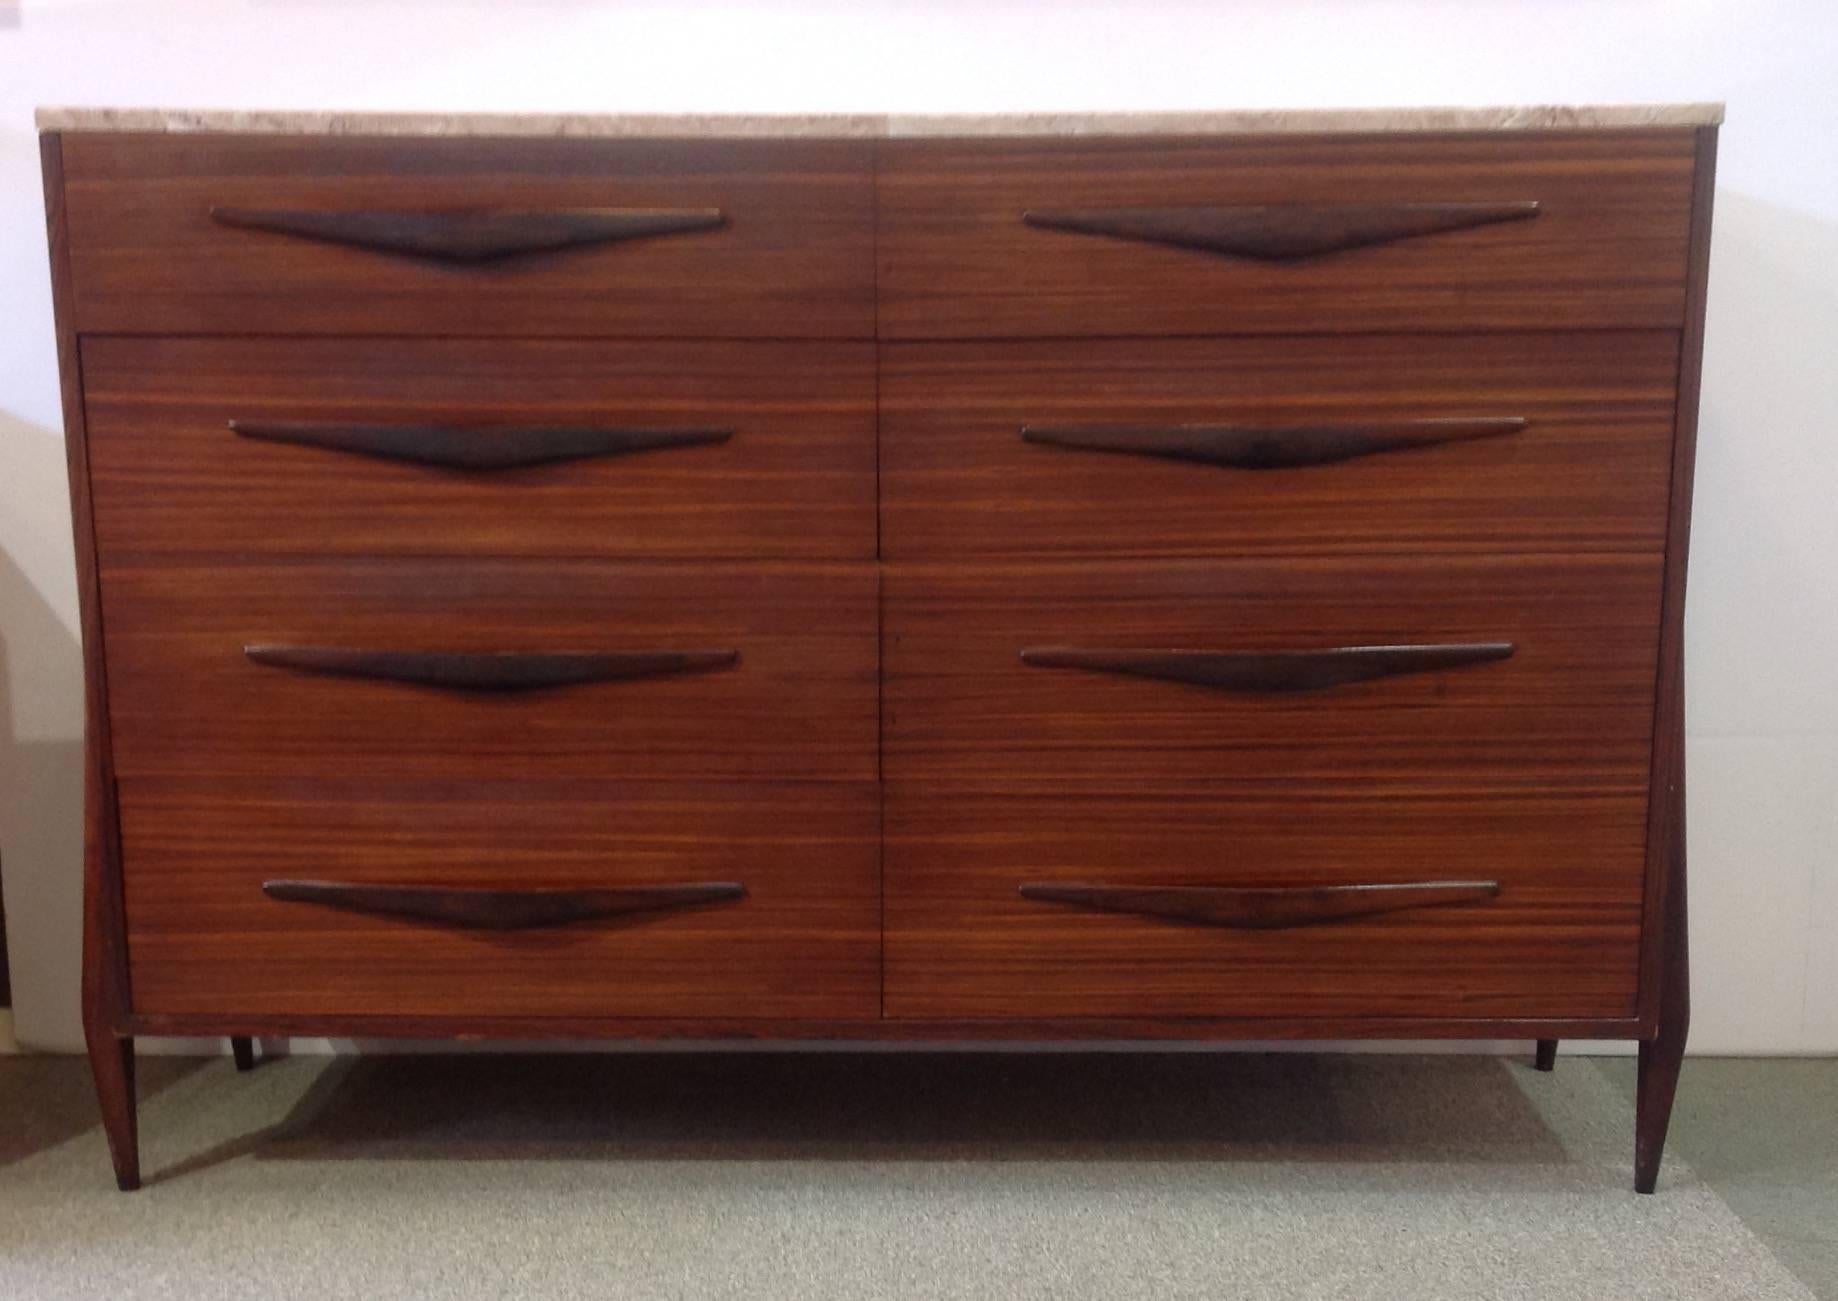 Mid-Century Modern chest of drawers with eight large drawers and a replaced cultured marble top. It was made by Pallagi in Hungary, circa 1960.